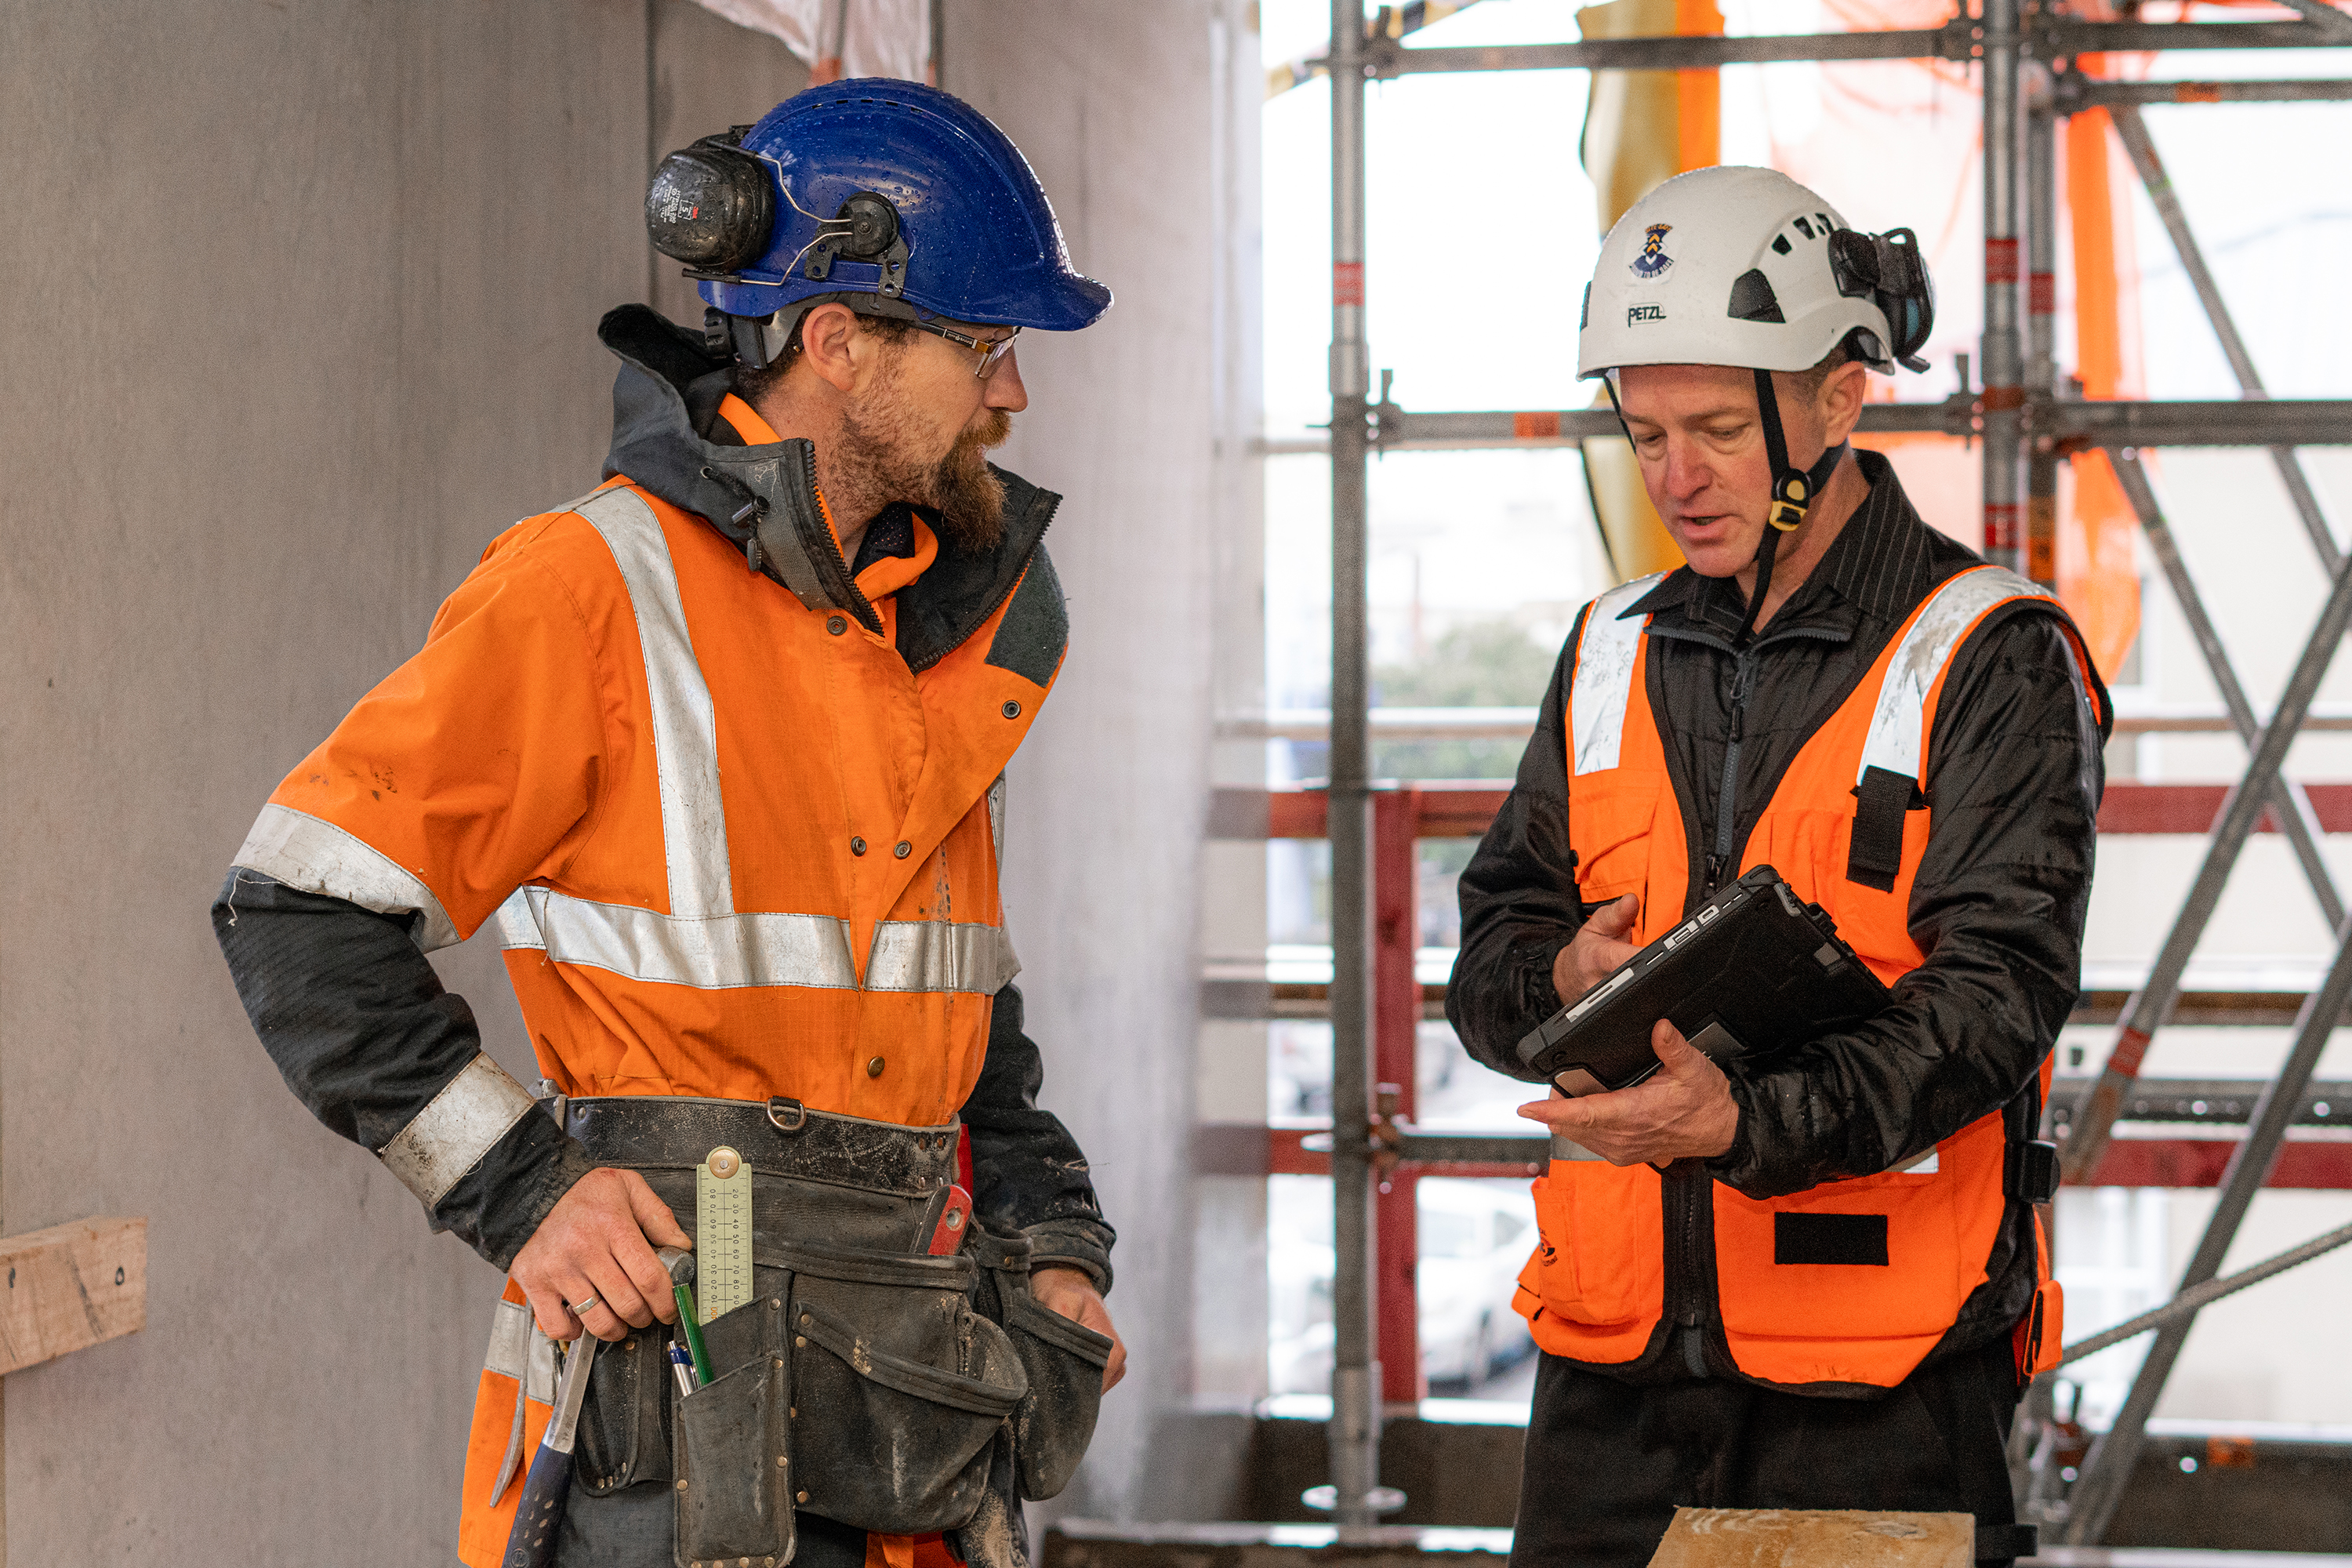 Health and safety site reviews crucial tool for wellbeing of construction industry